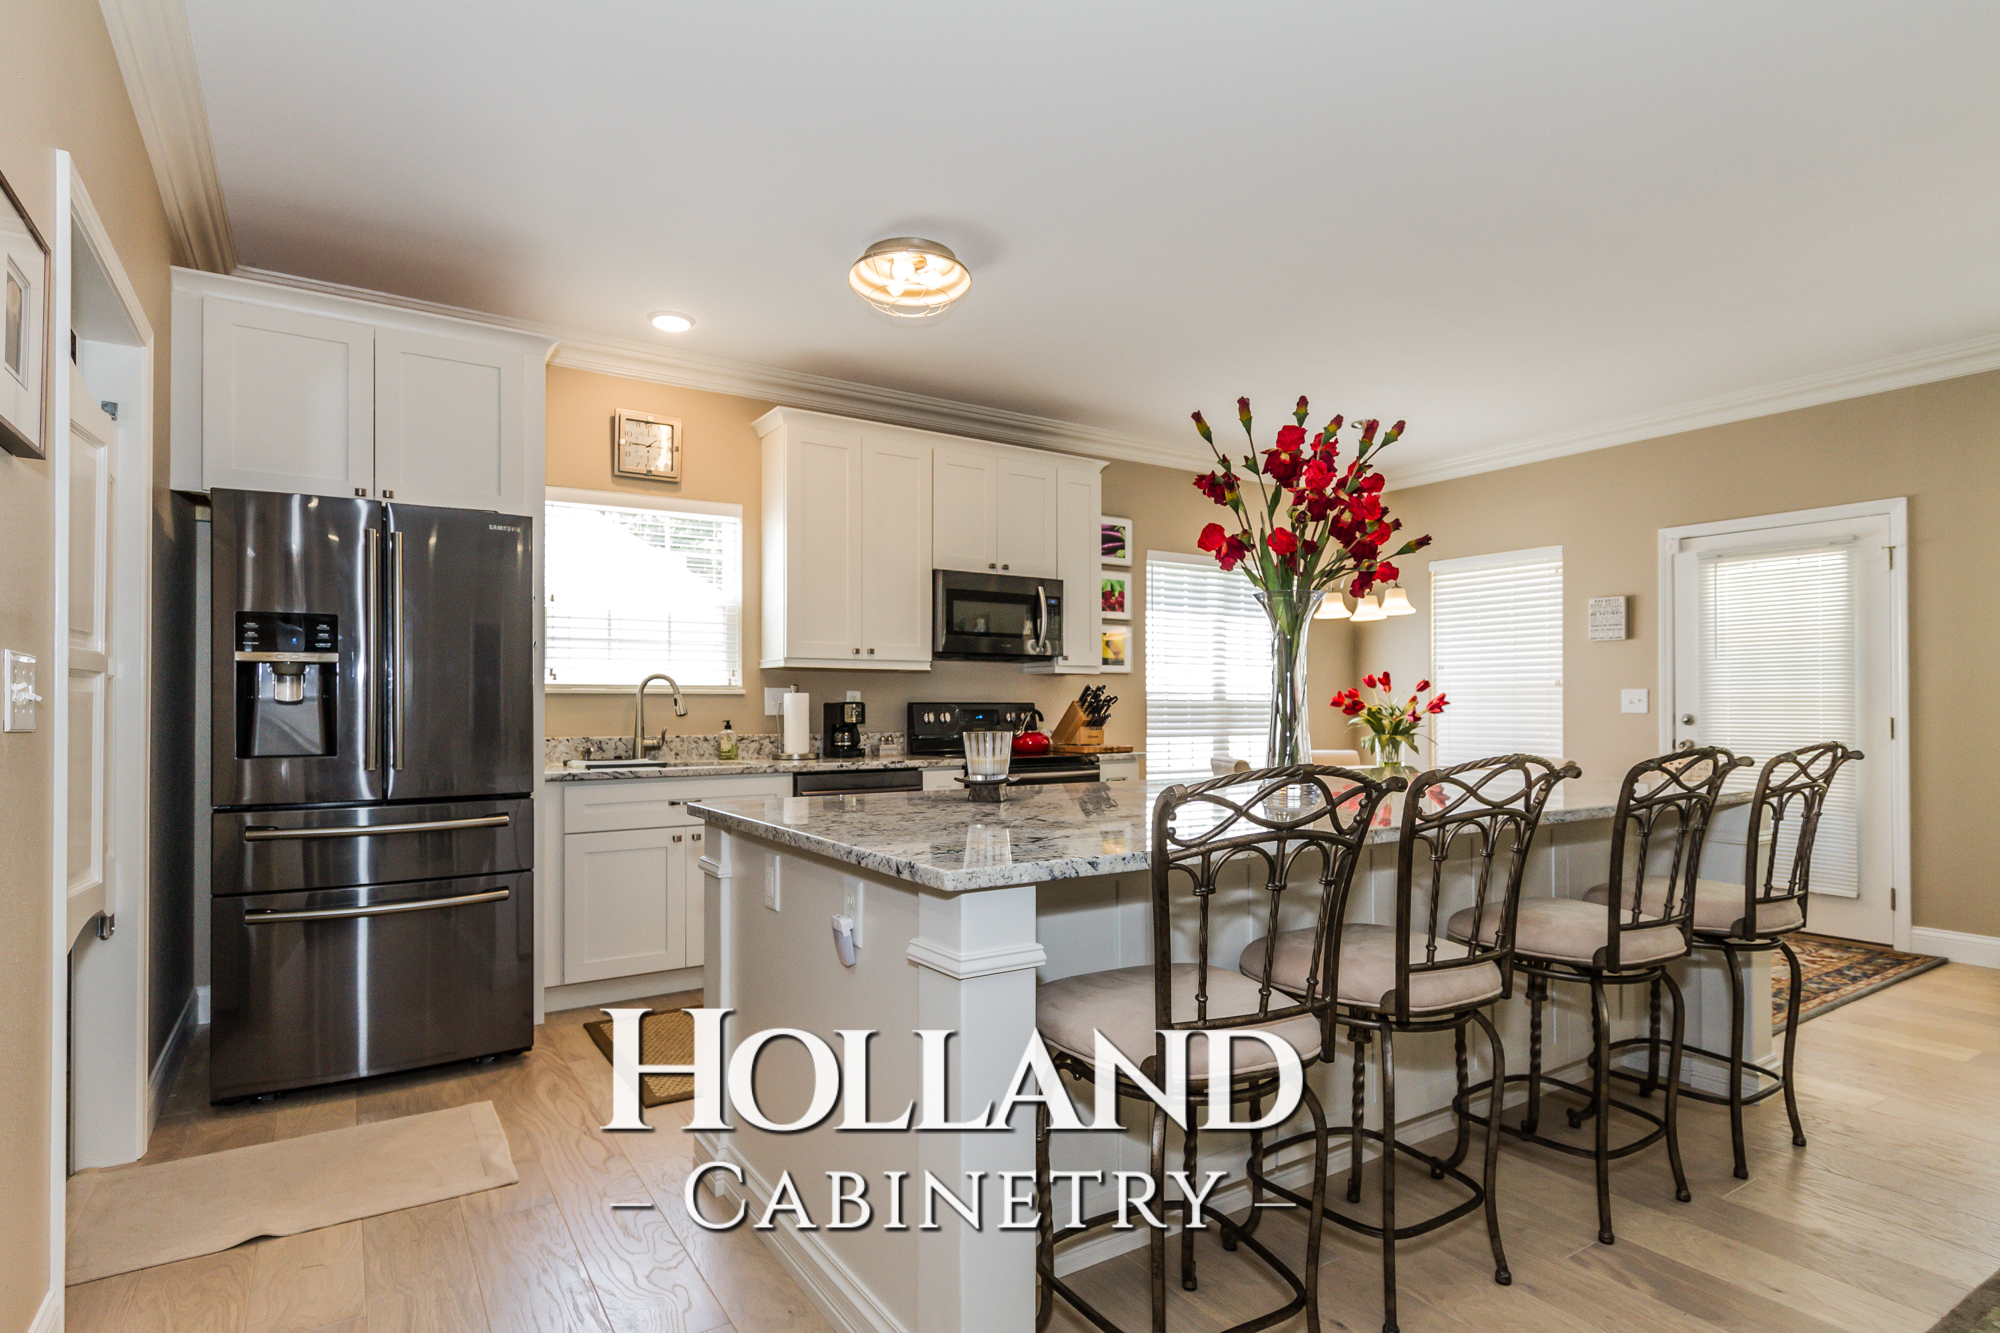 Holland-Cabinetry-Kitchen-Cabinets-6.jpg